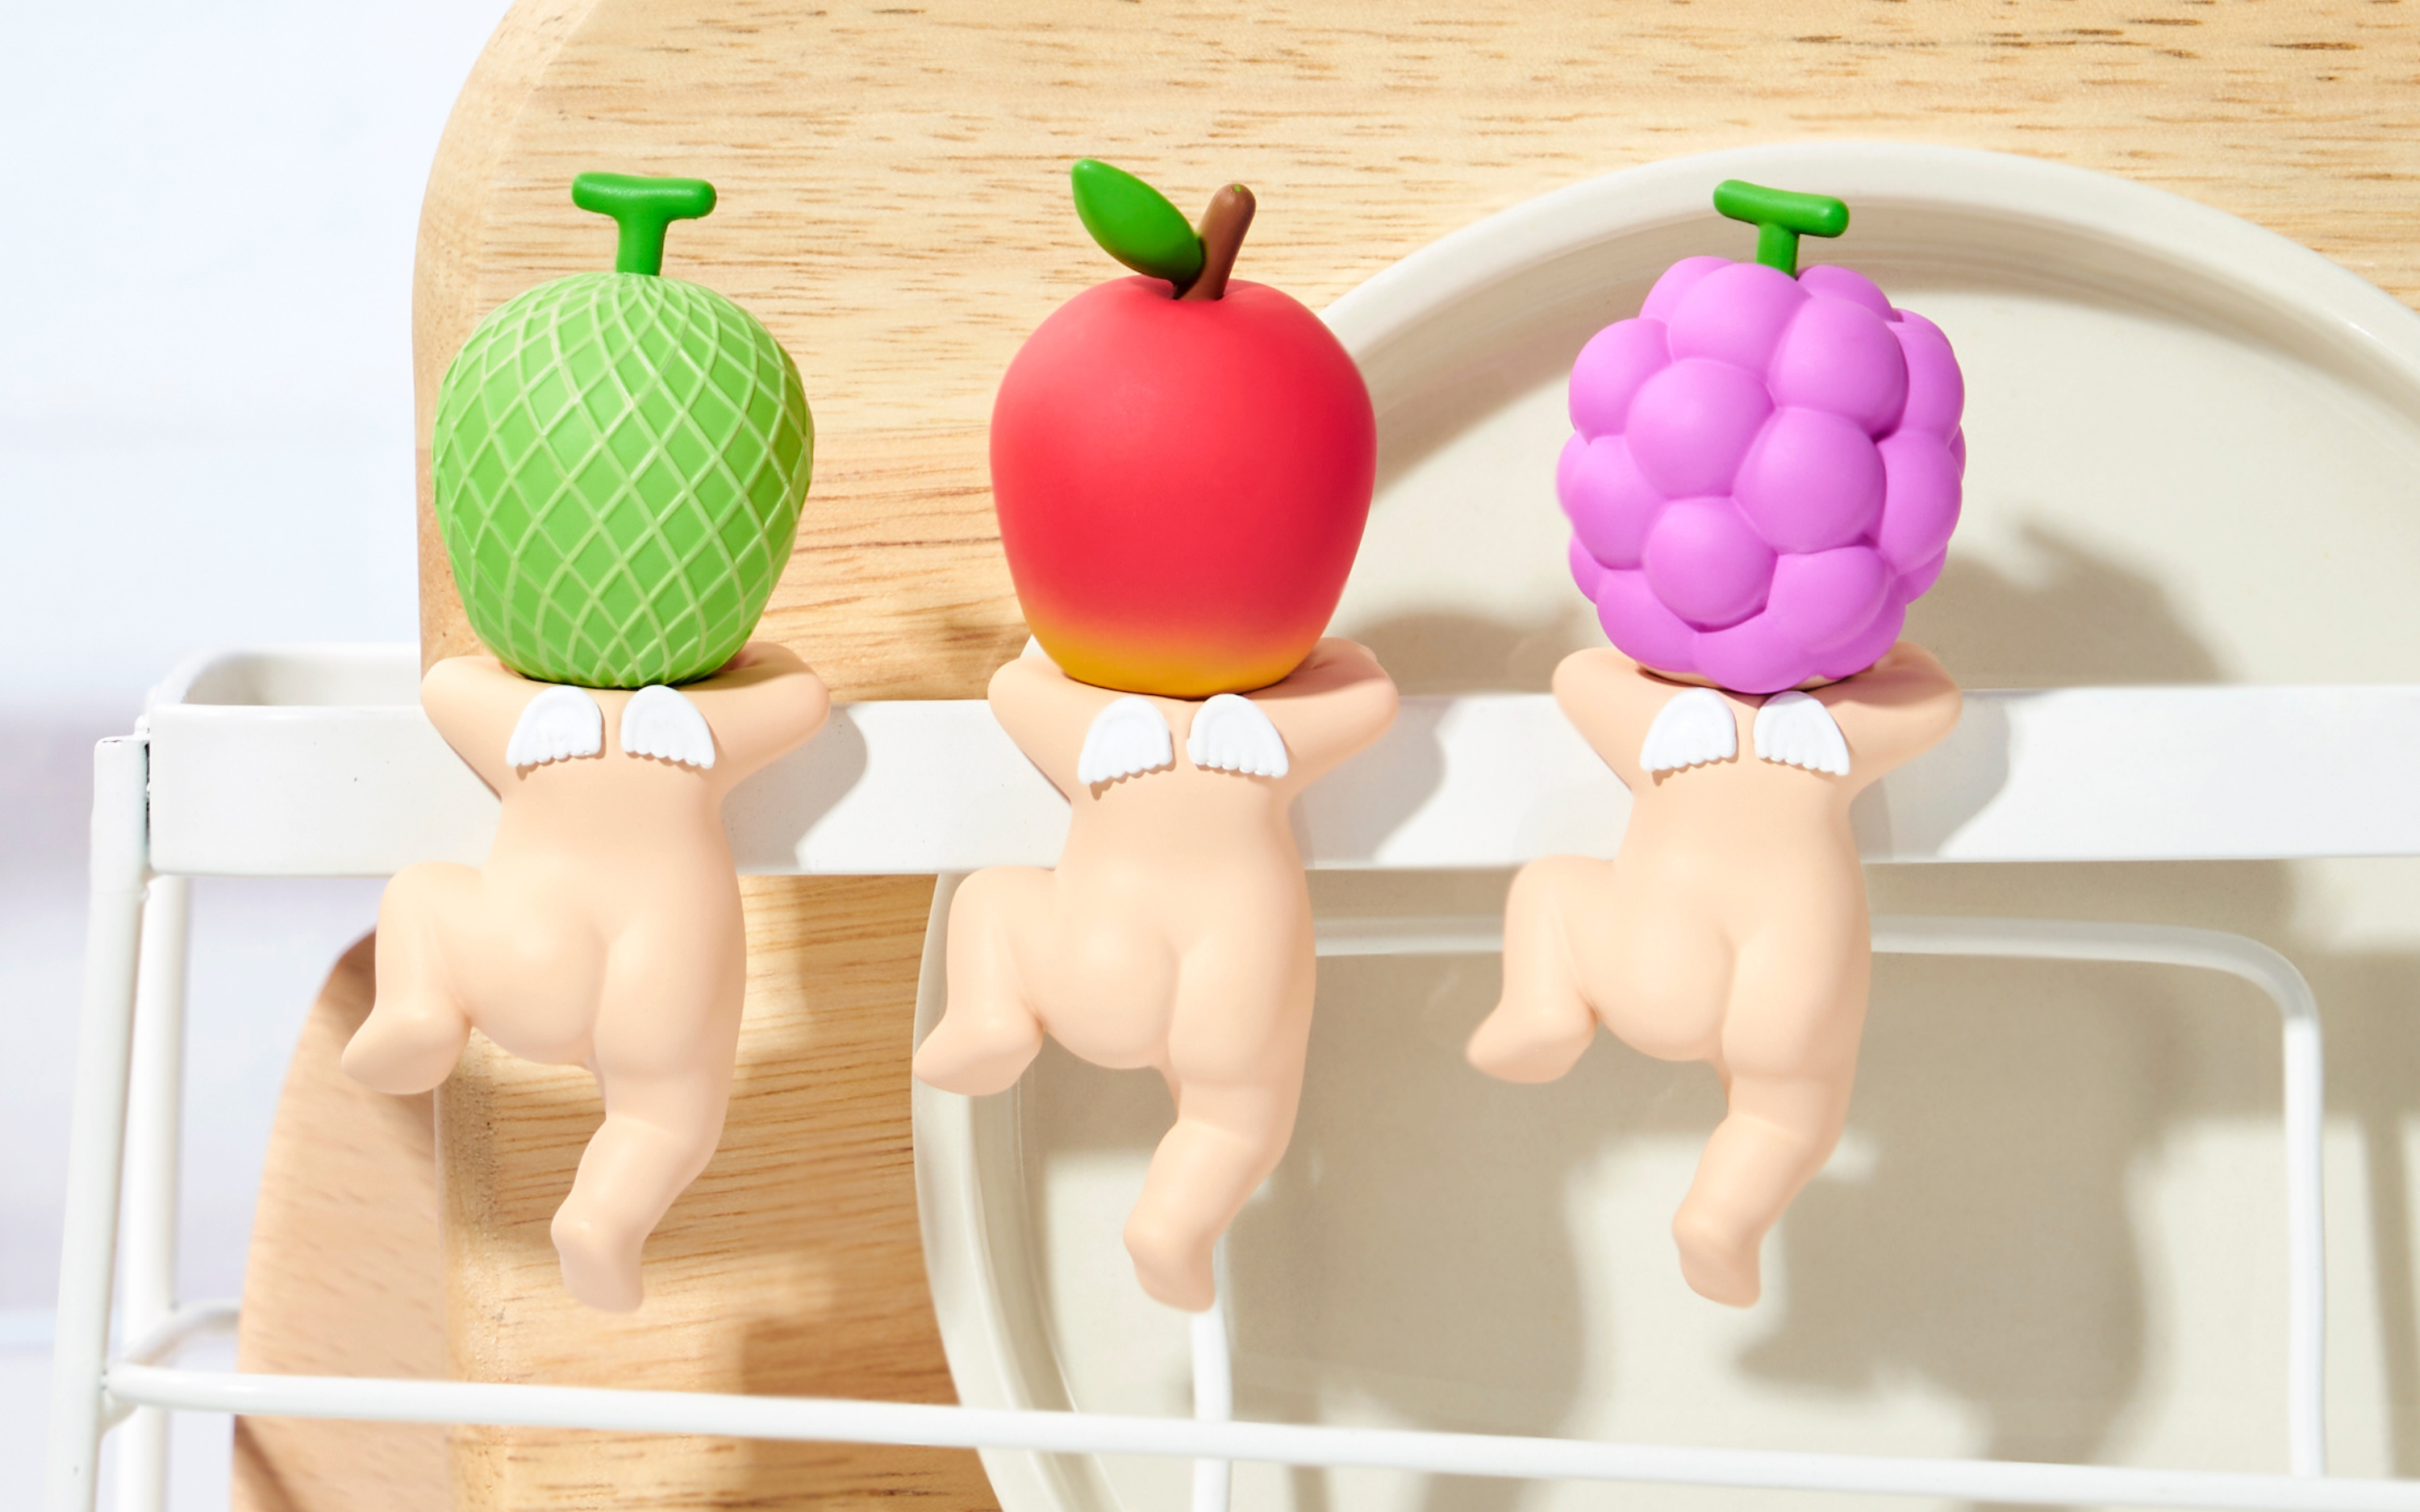 New Release : Sonny Angel is wearing colorful fruit and vegetable  headdresses and is mischievously climbing up onto something!『HIPPERS  Harvest Series』 ｜ Sonny Angel - Official Site 